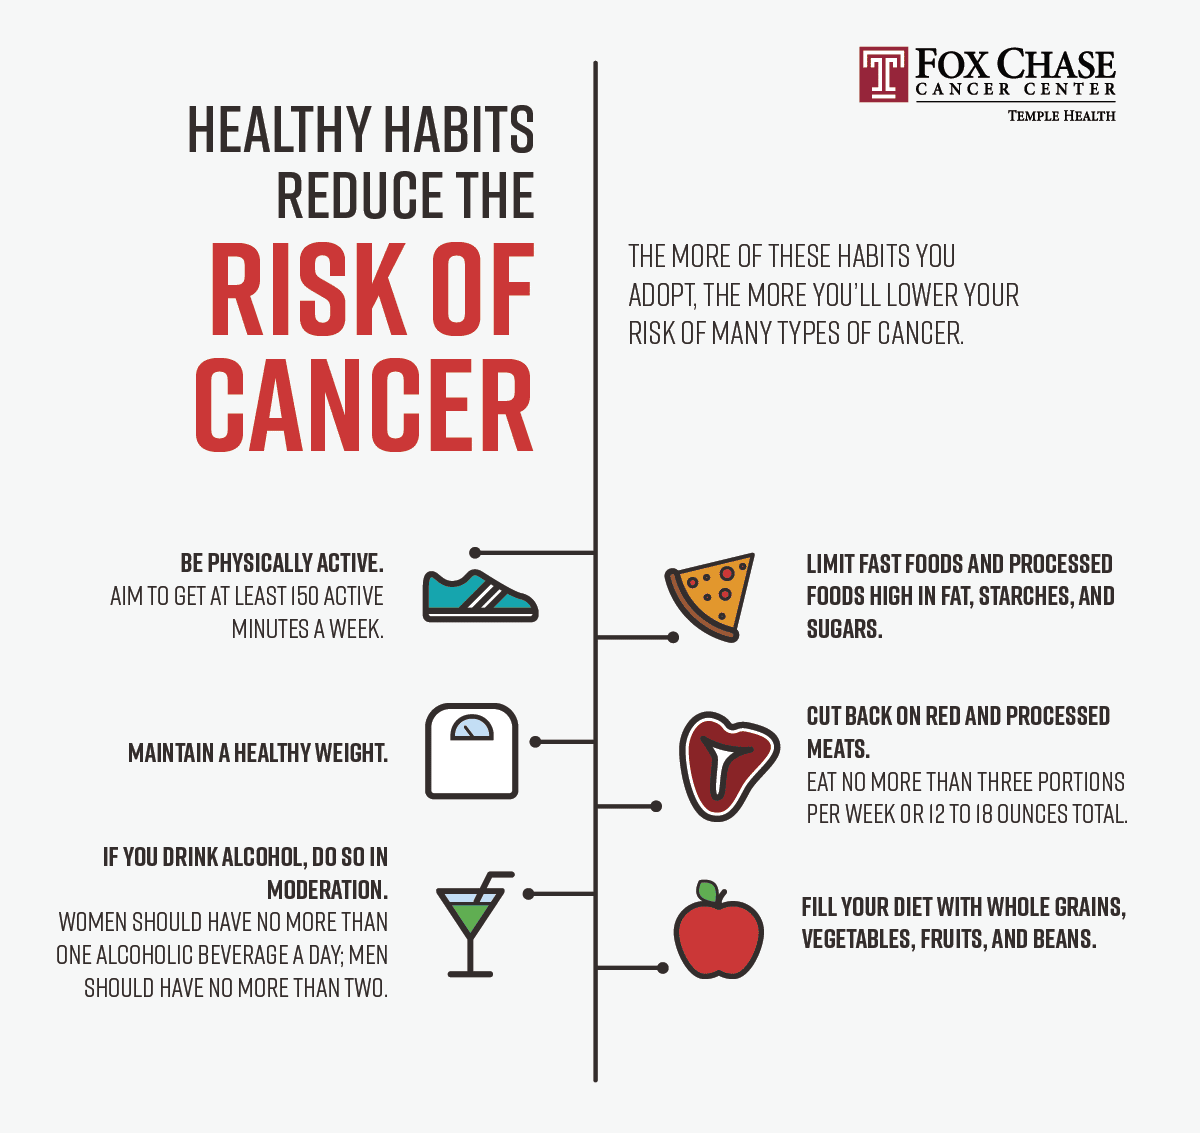 Healthy Habits to Reduce Your Cancer Risk